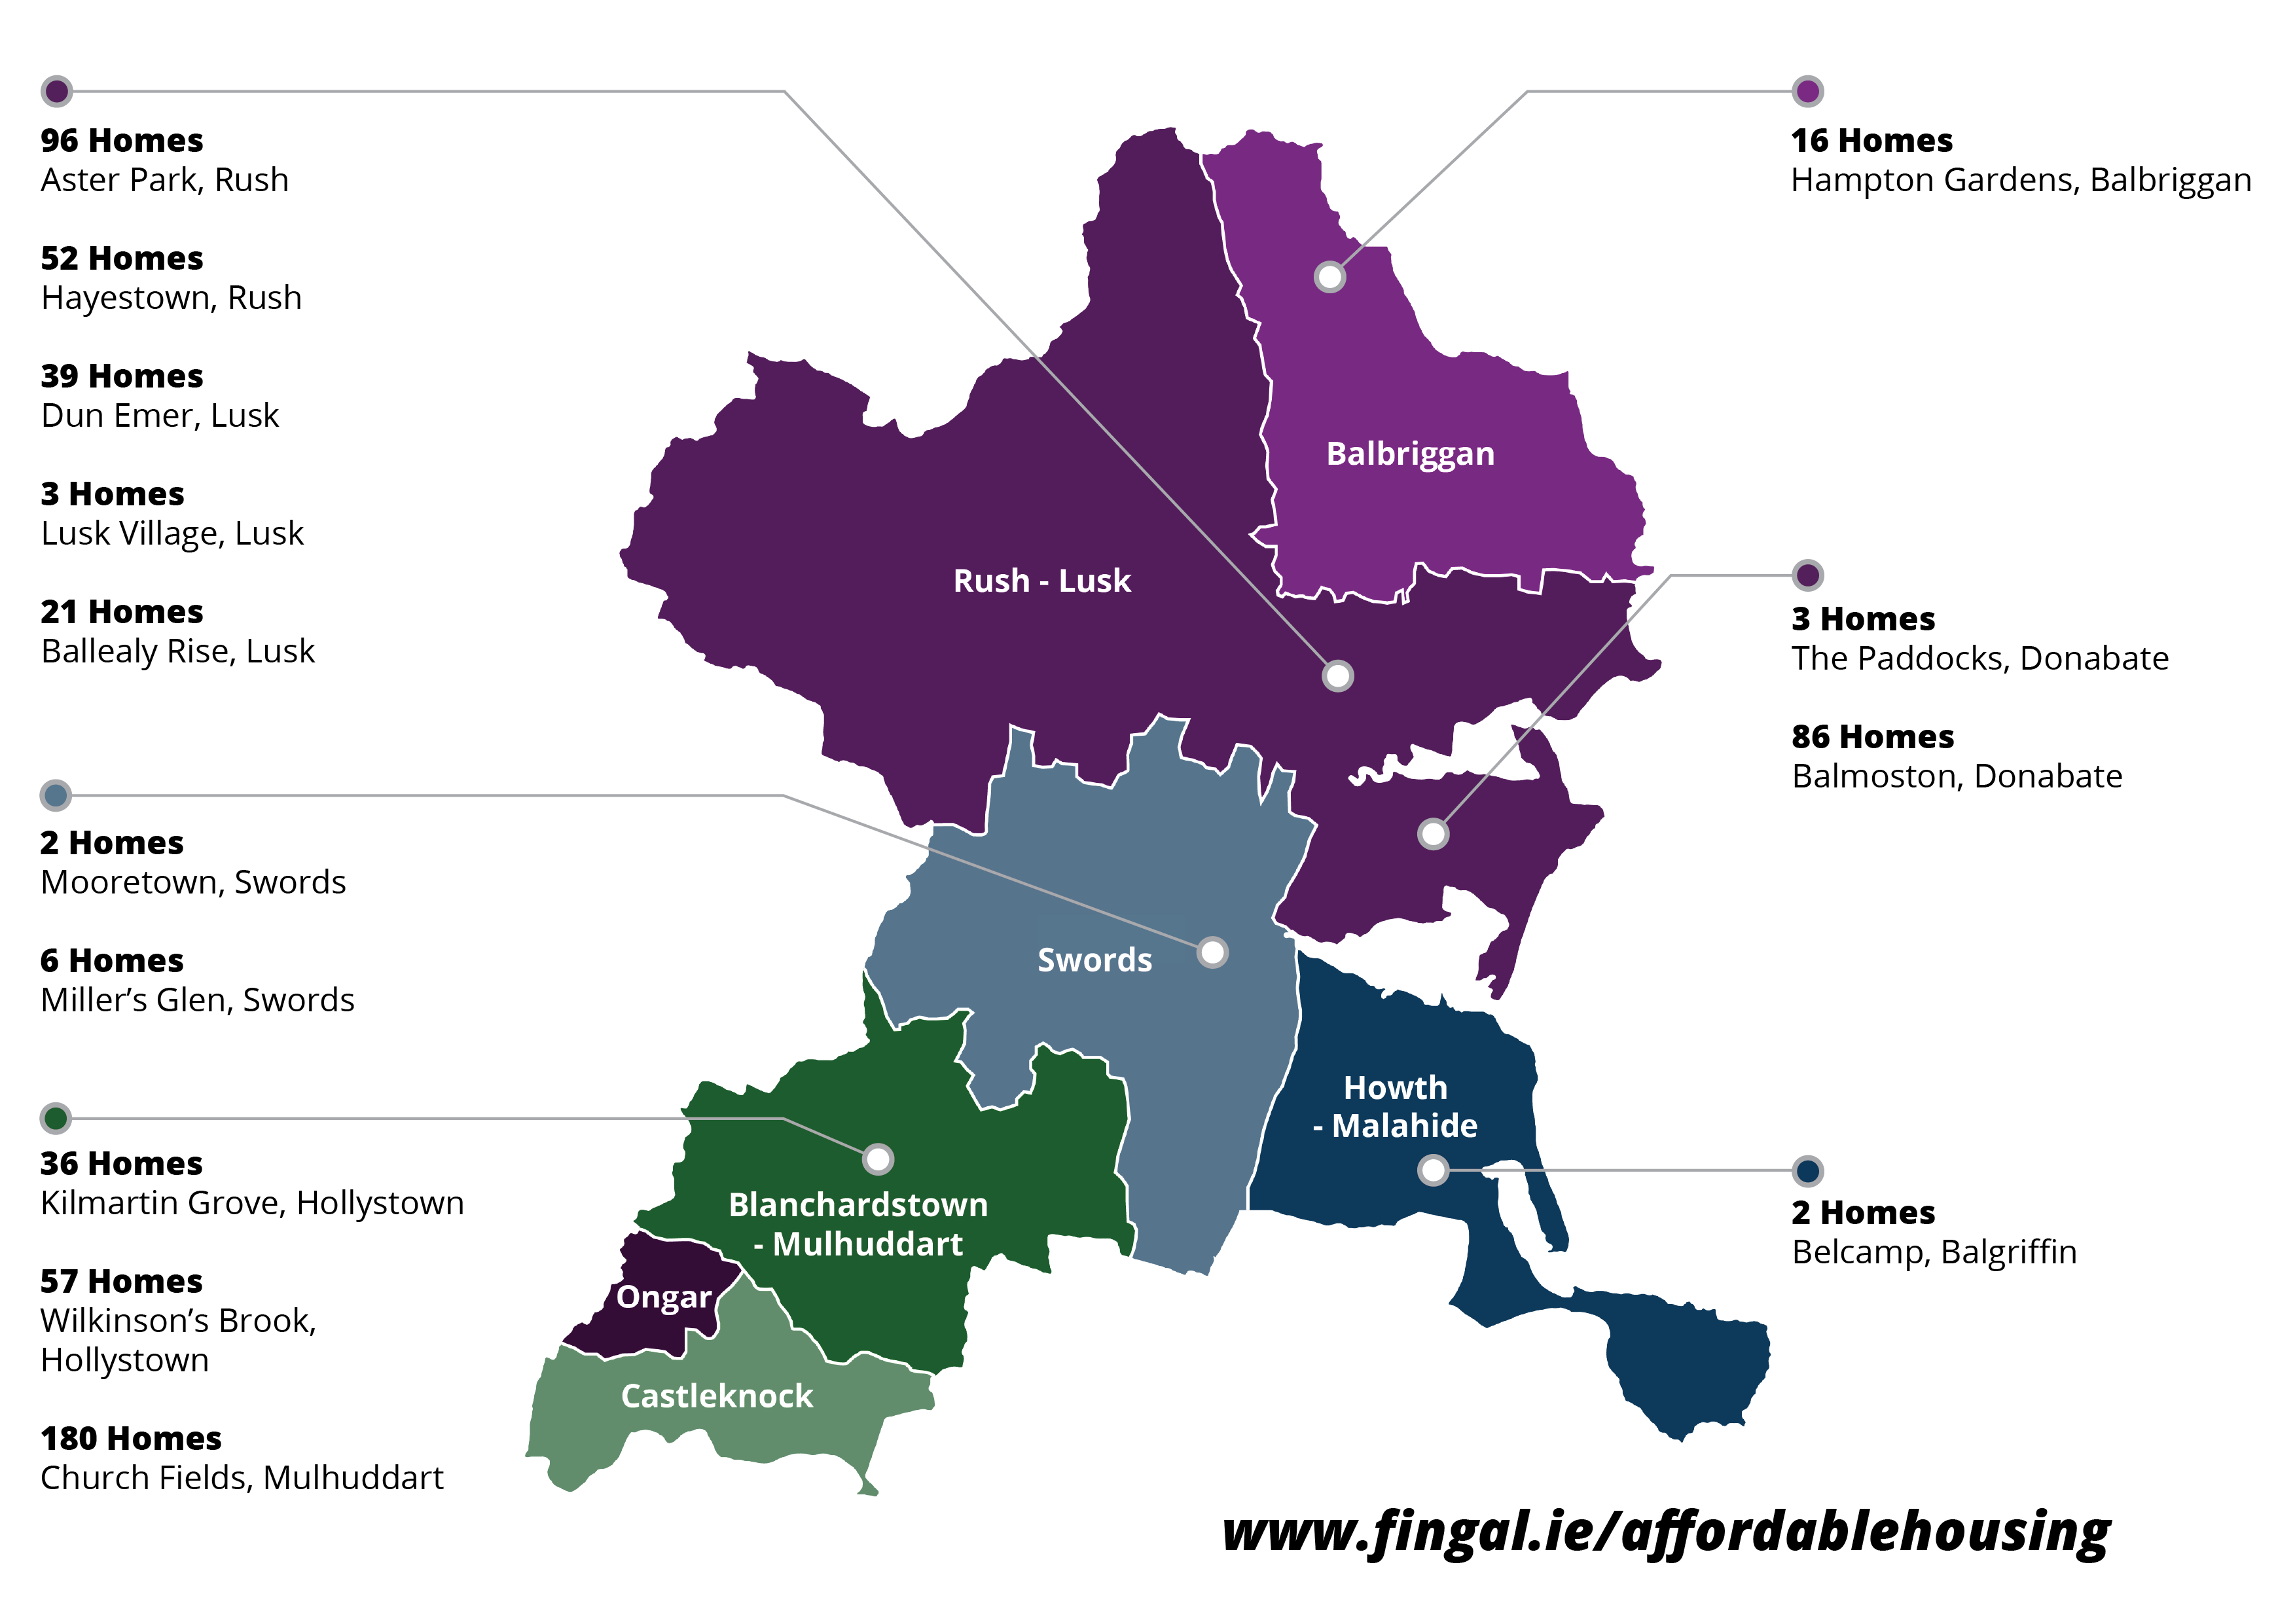 A graphic showing details of Affordable Housing delivery in Fingal